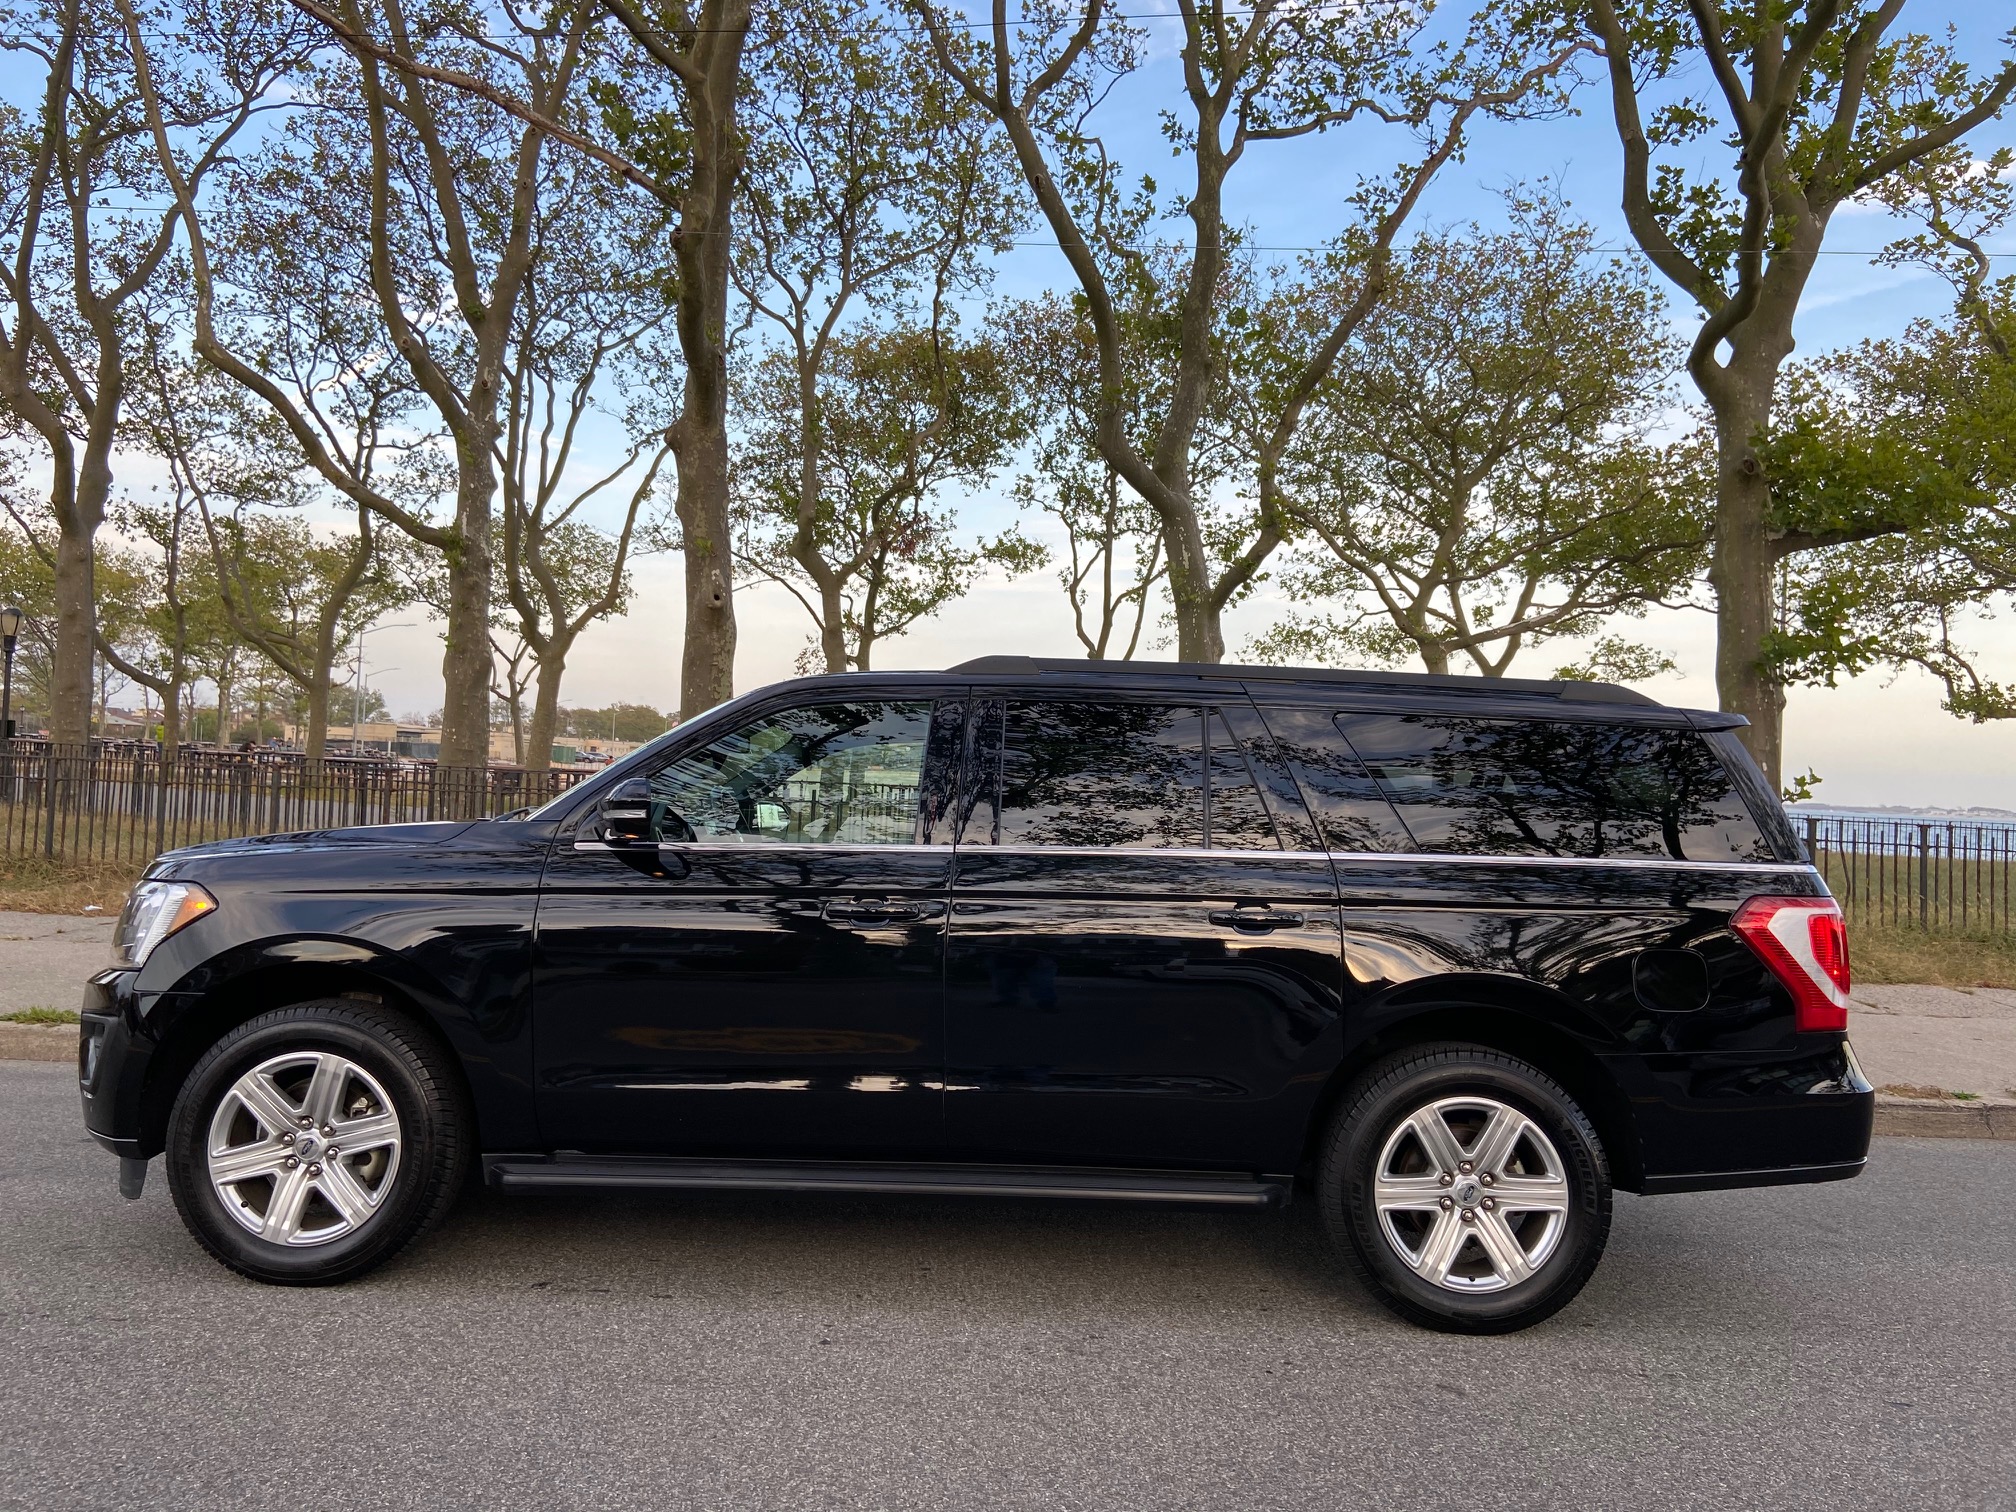 Used - Ford Expedition MAX XLT SUV for sale in Staten Island NY